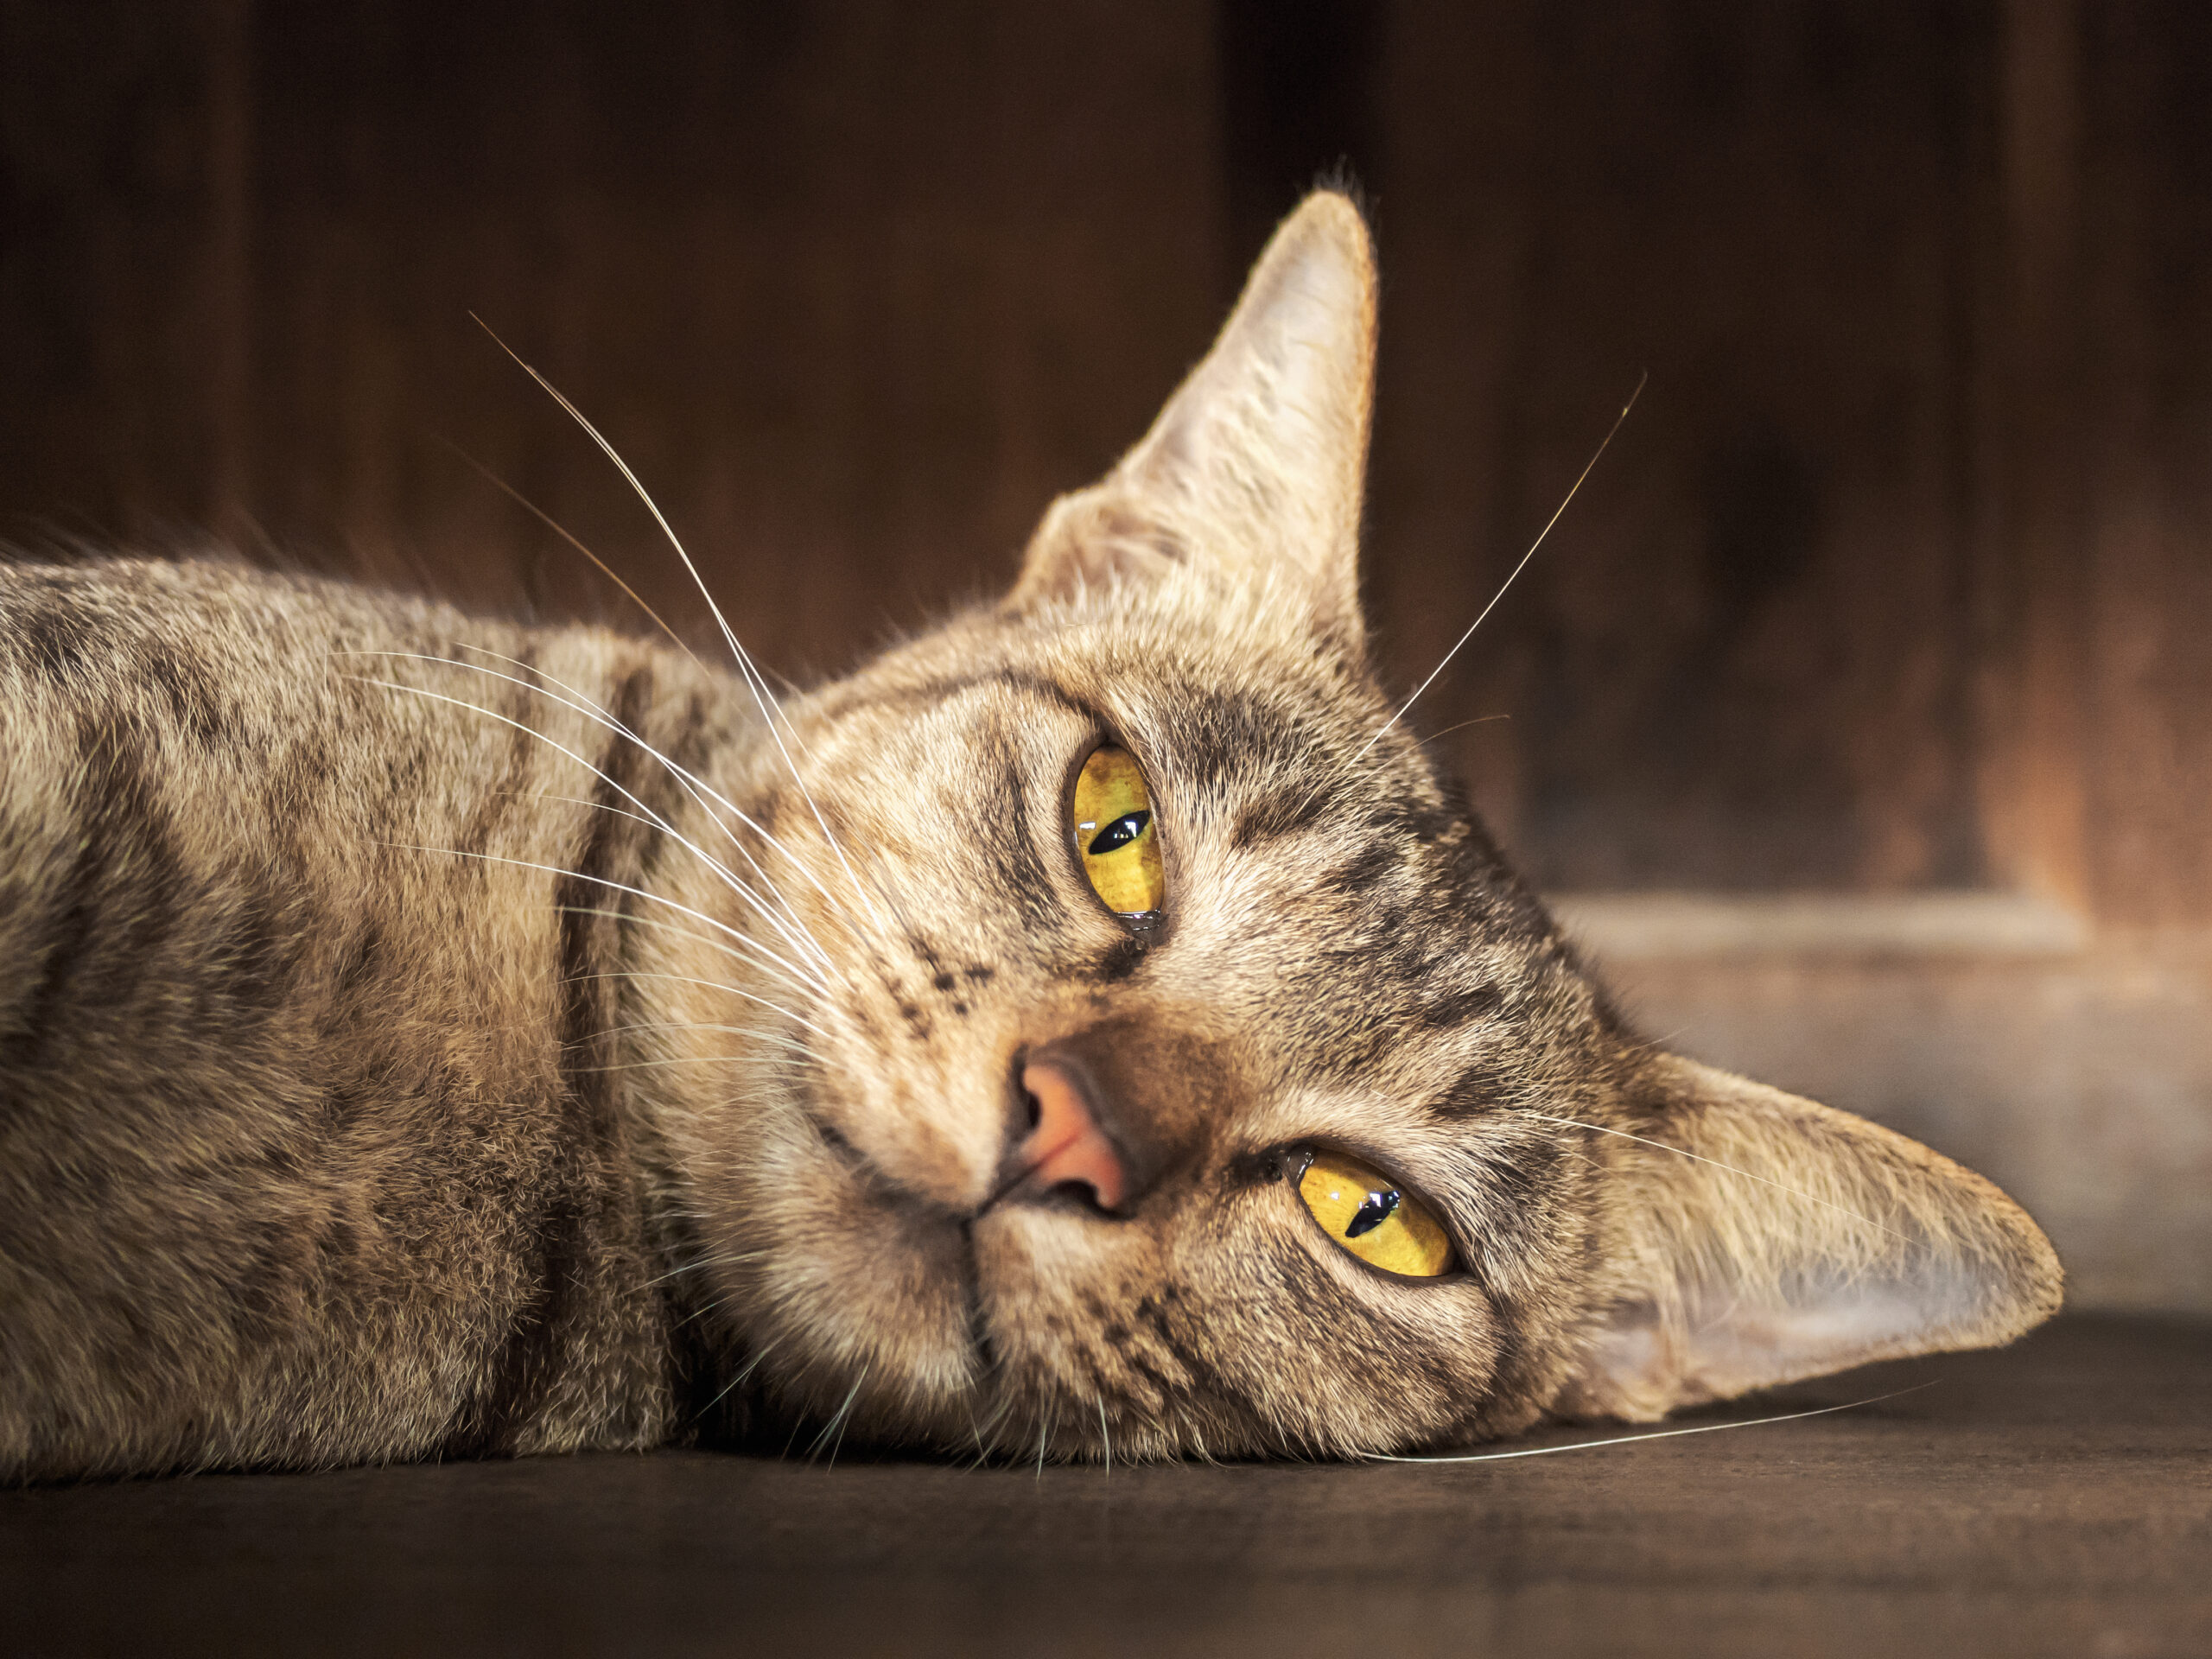 8 Common Household Products Dangerous to Cats